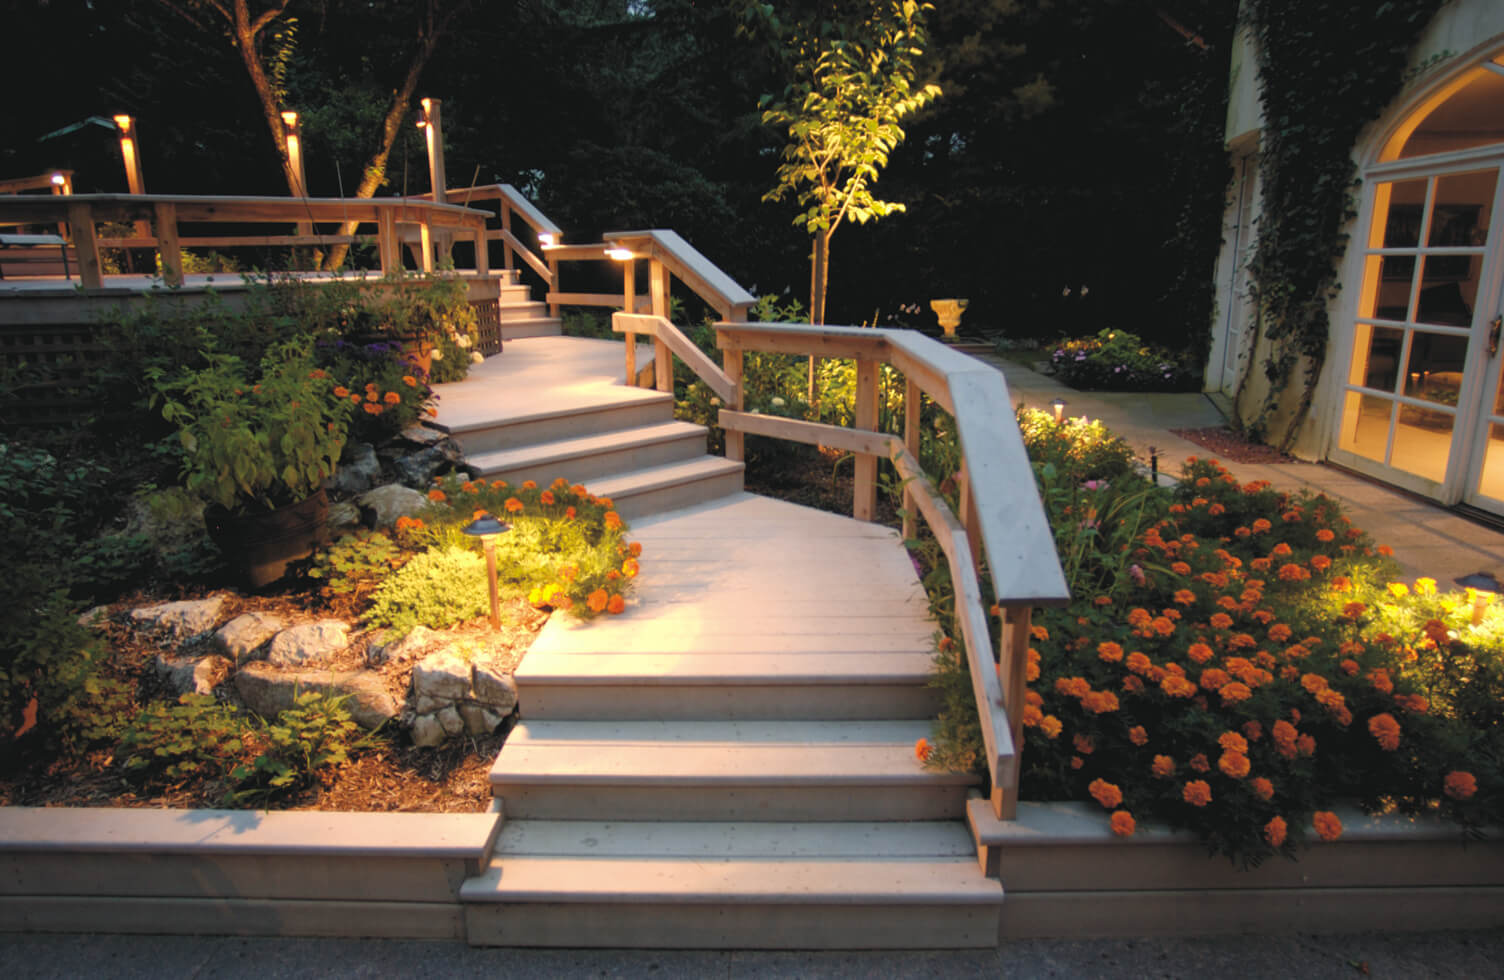 Exterior home pathway with lighting